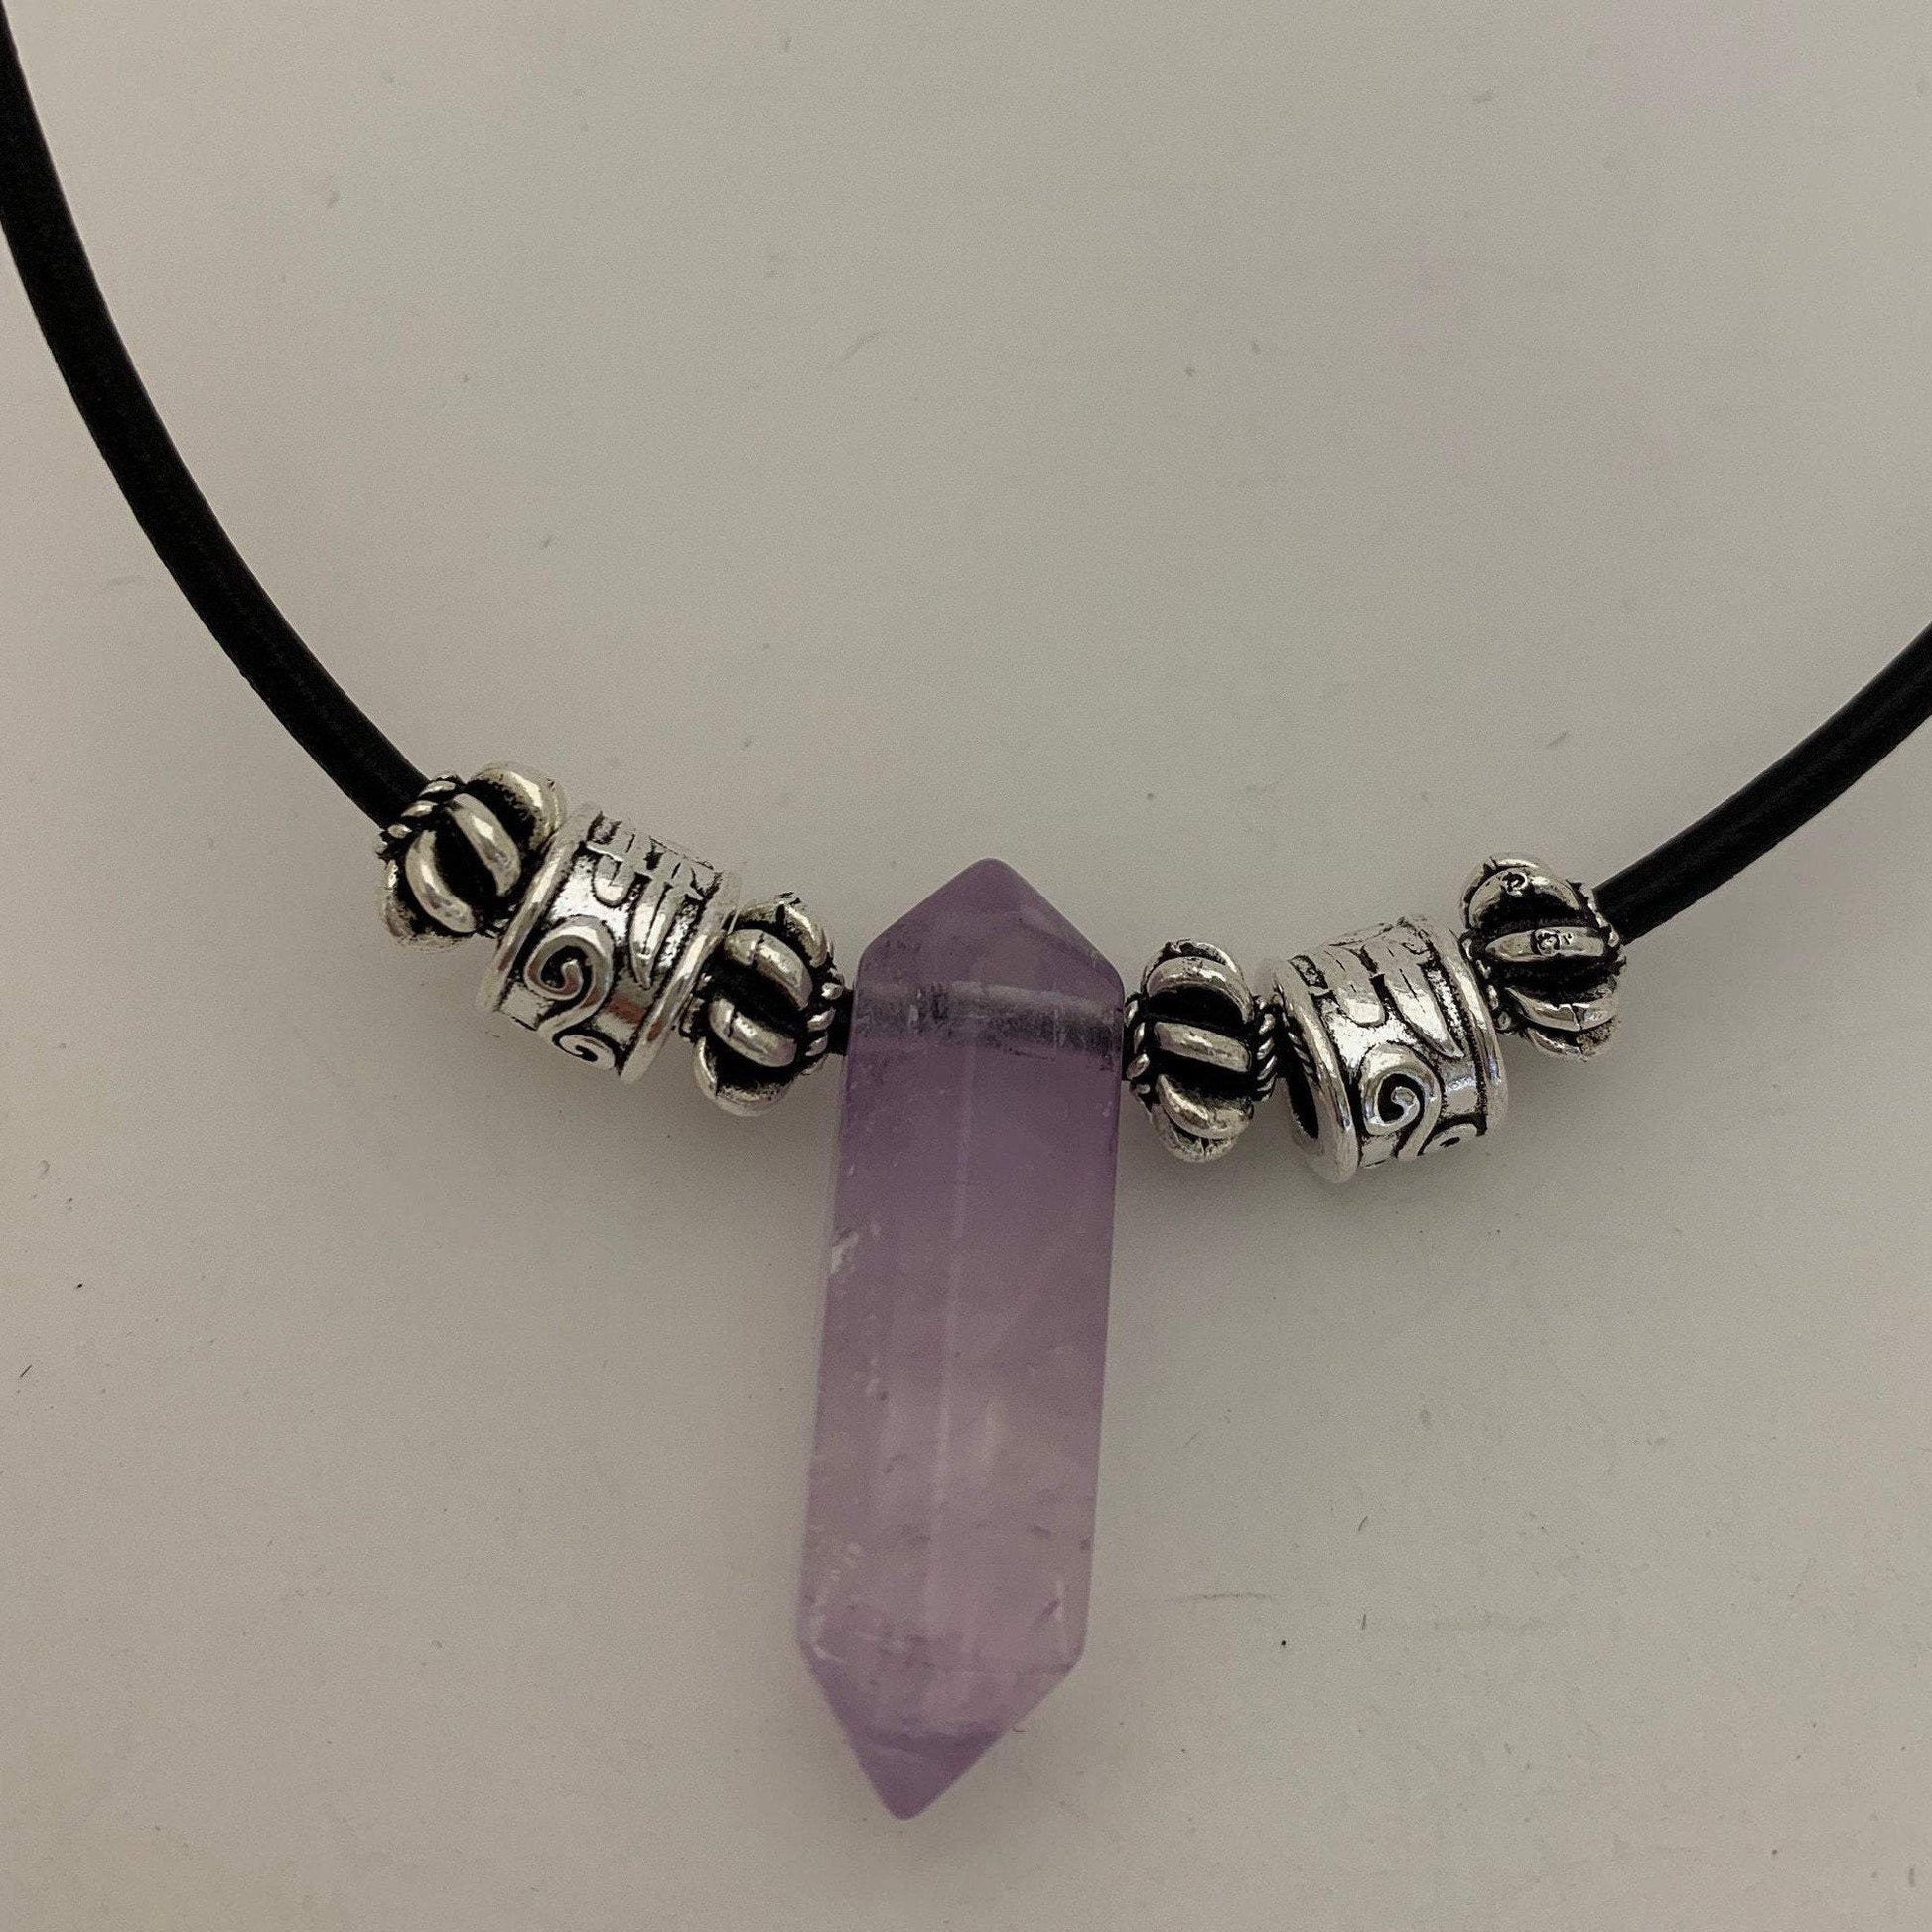 Natural Amethyst with Tibetan bead on leather cord with magnetic clasp